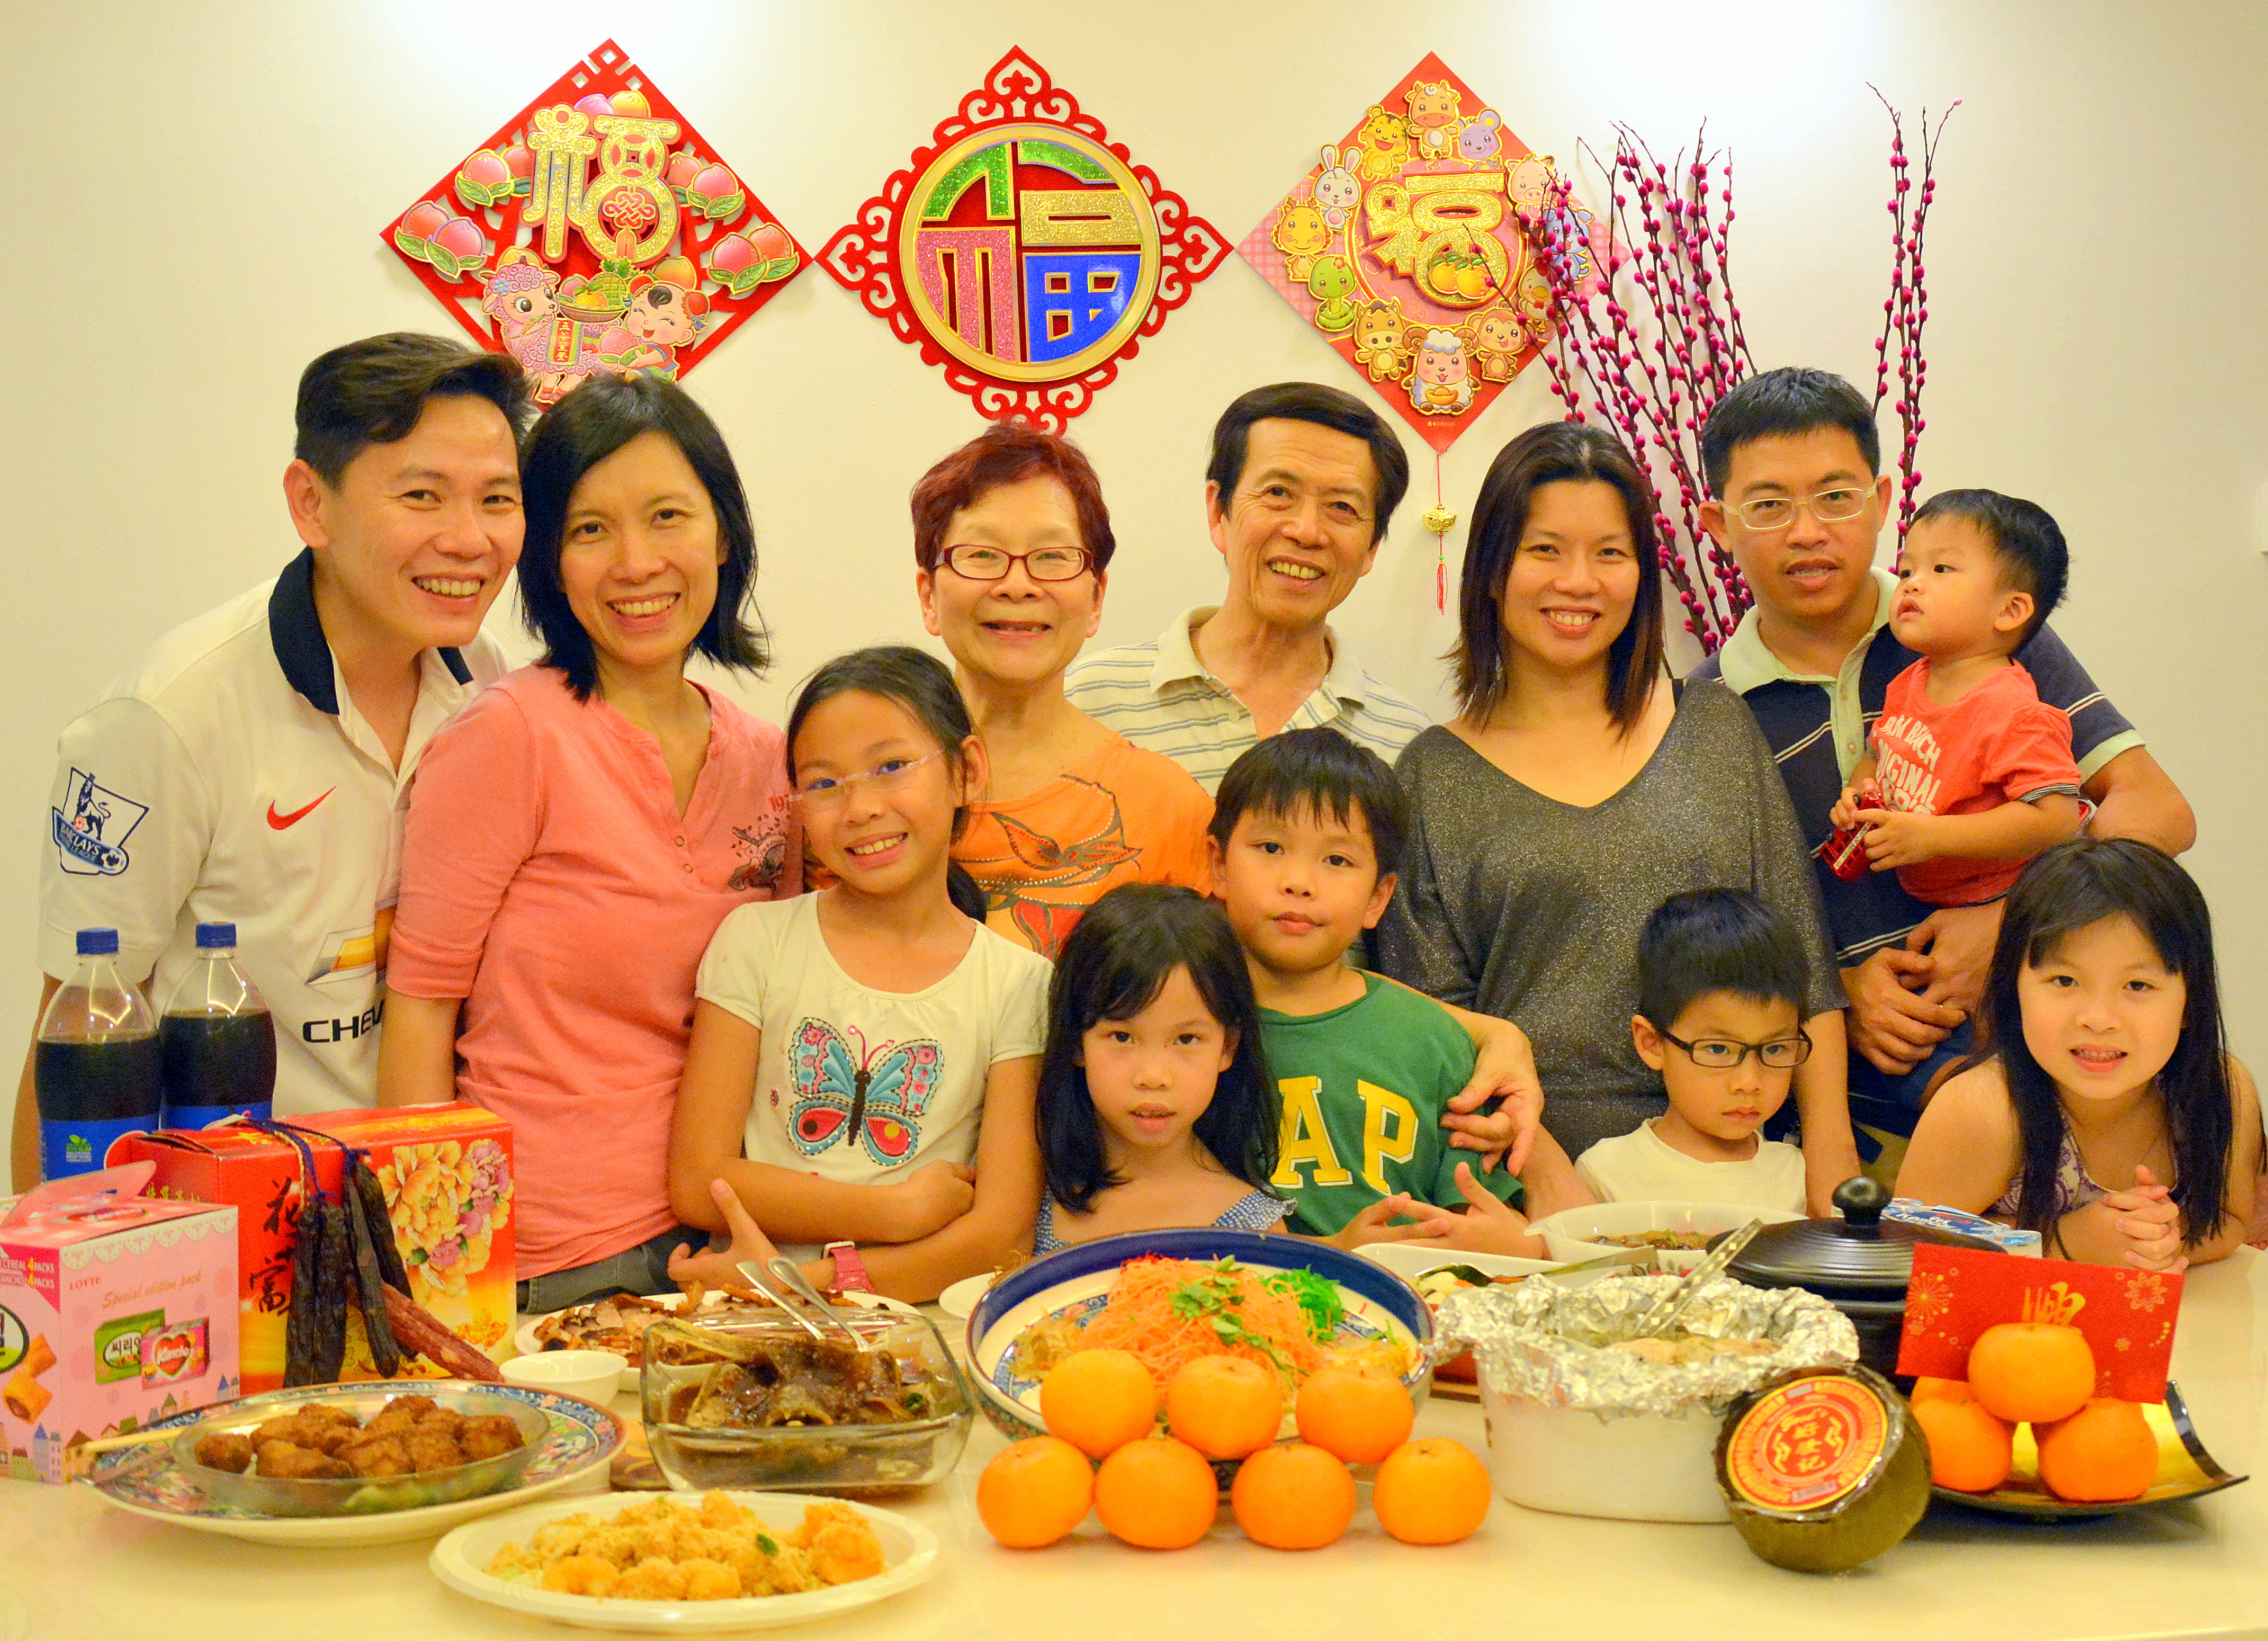 Chinese New Year Traditions Customs - Ed Unloaded.com | Parenting